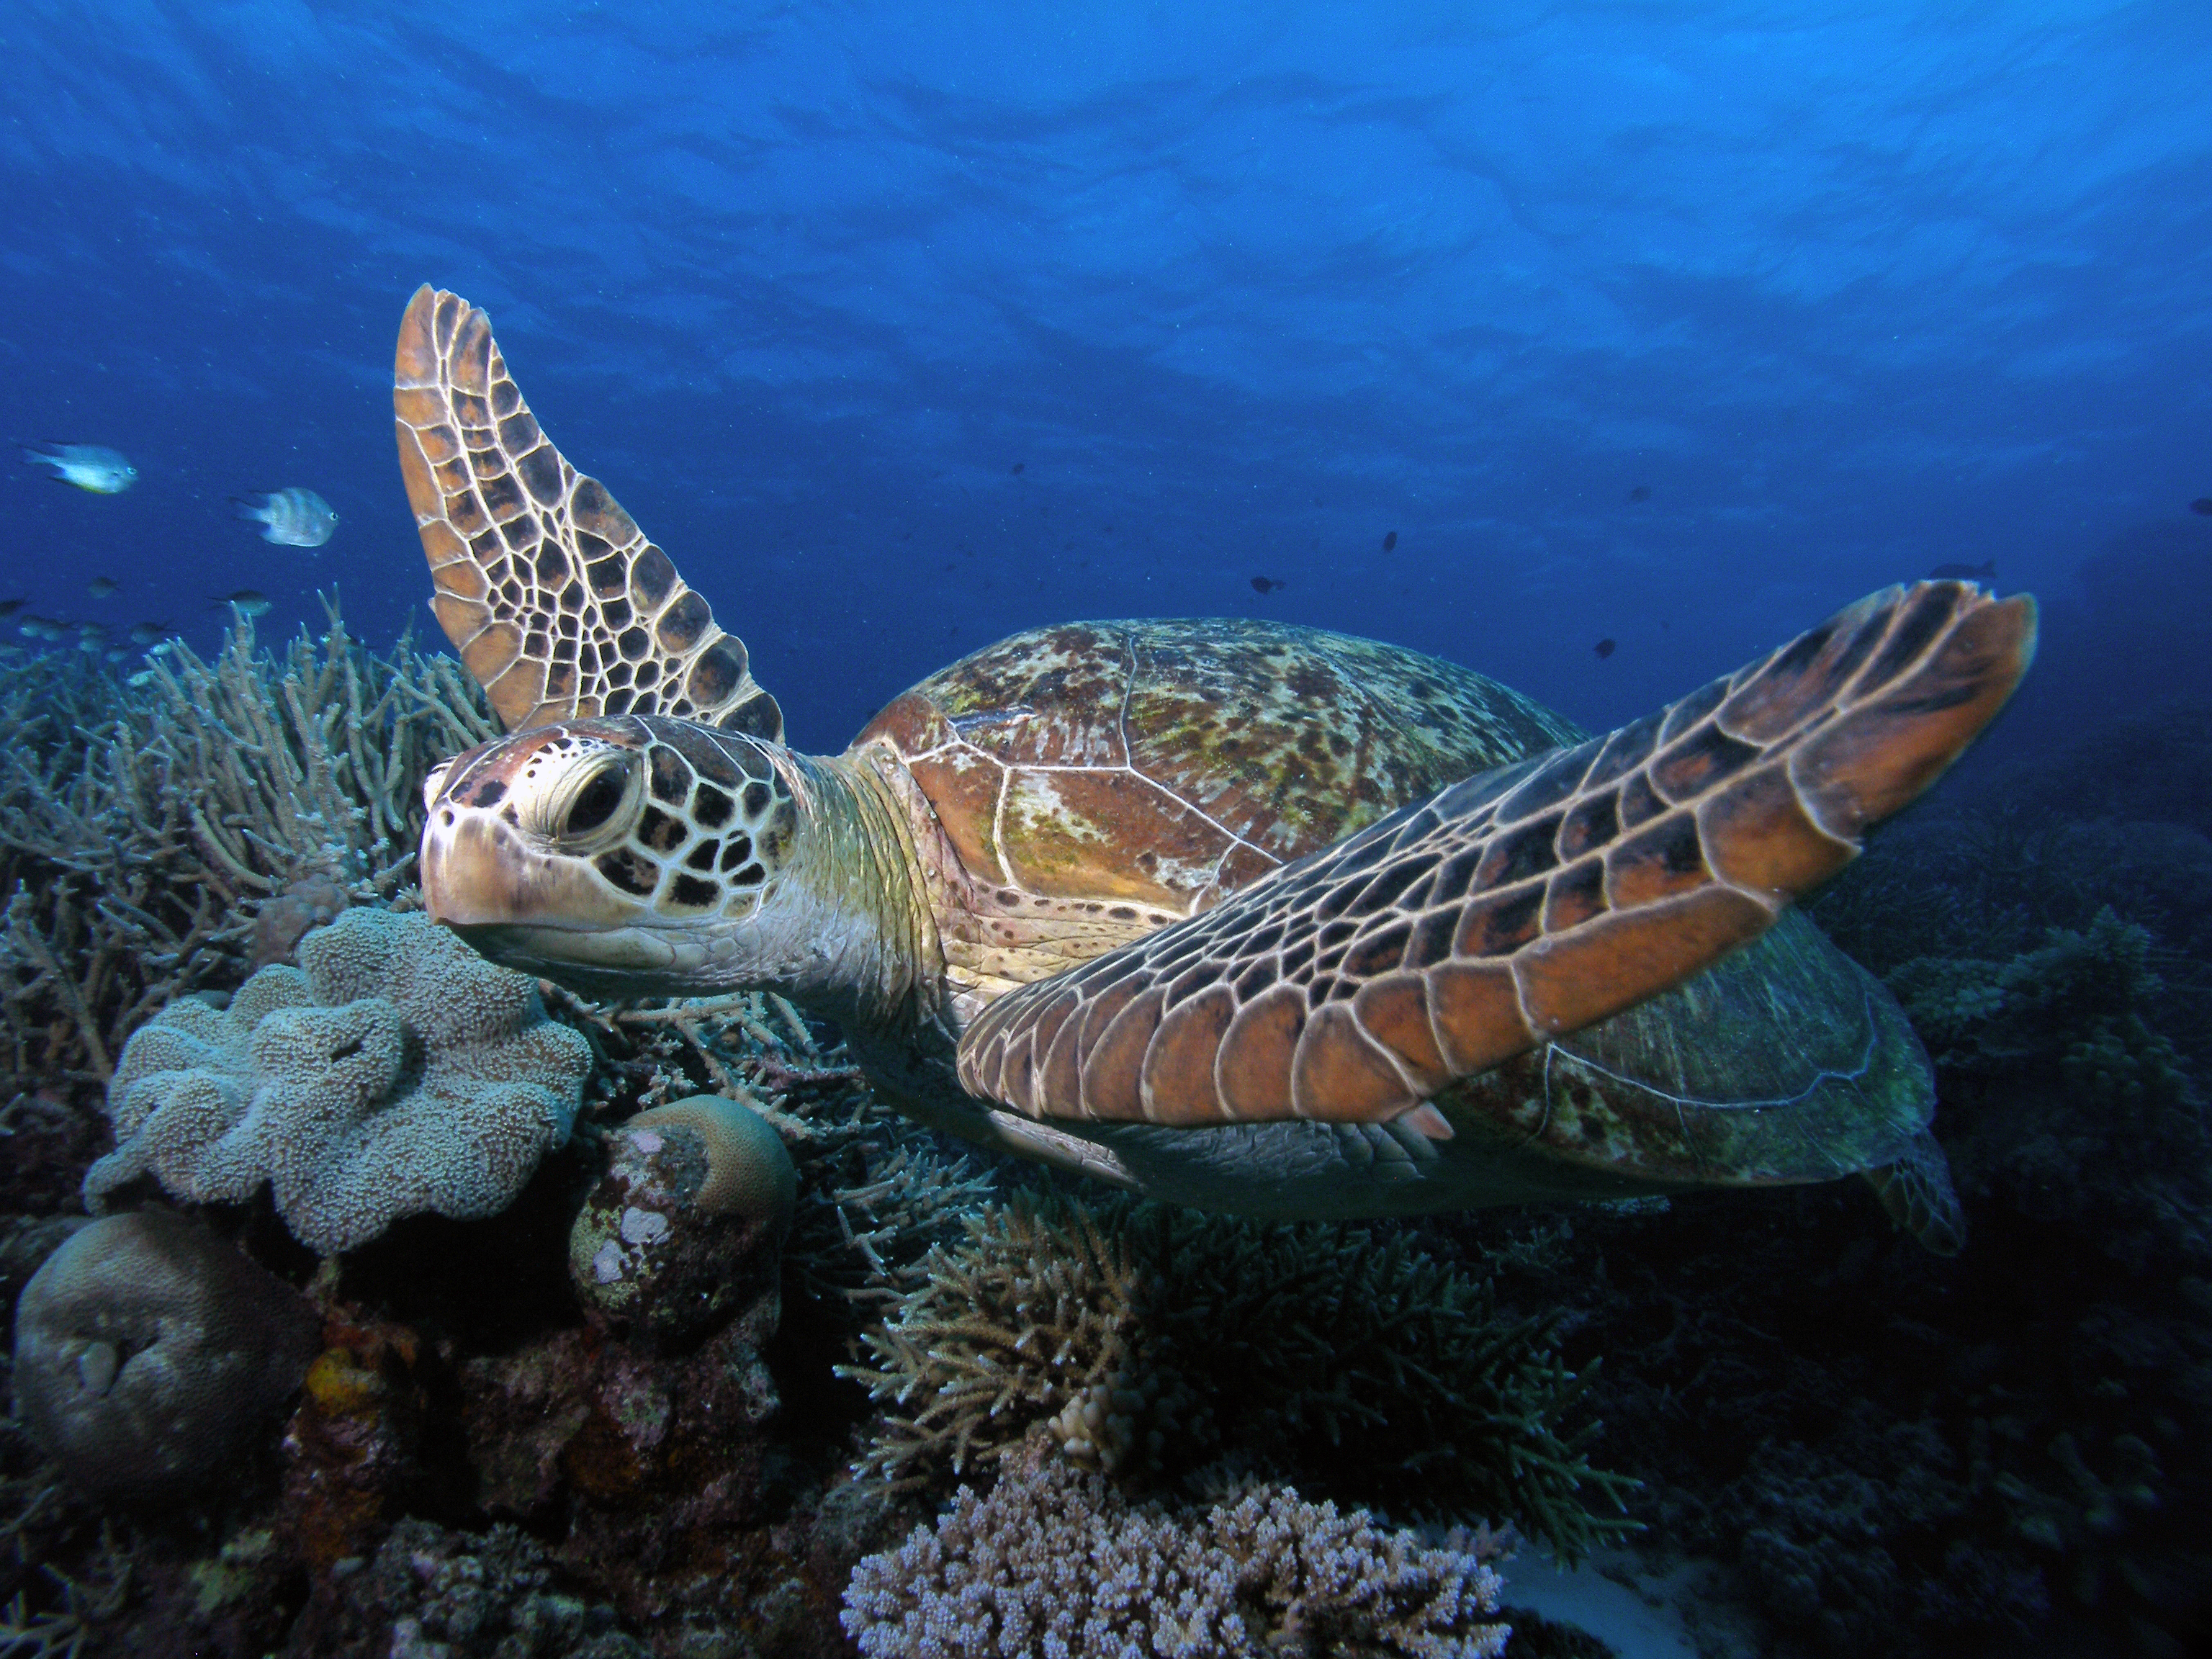 Turtles are common at Steve's Bommie. Photo Courtesy of Mike Ball Dive Expeditions